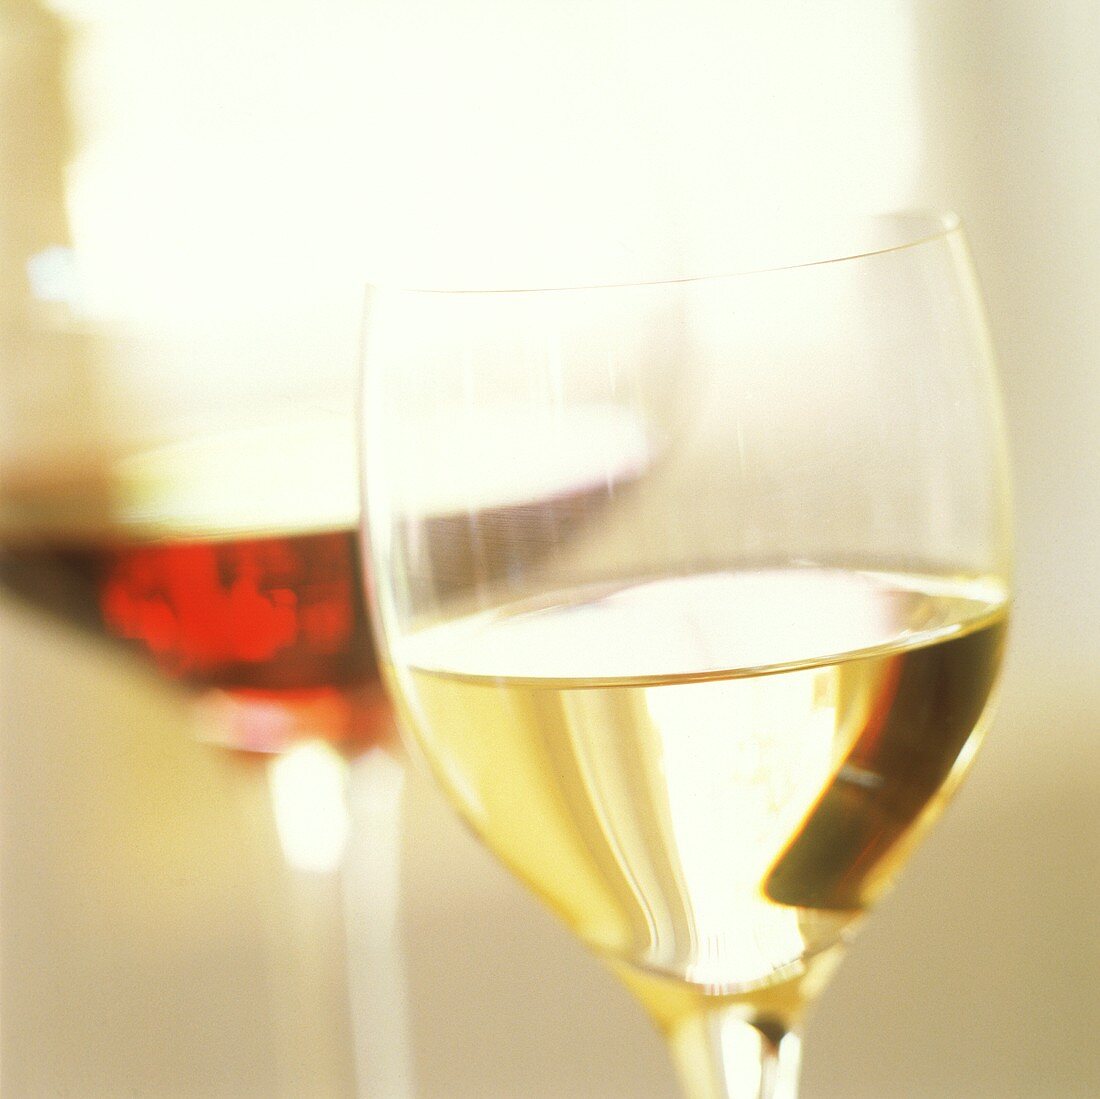 Red and White Wine with Reflections